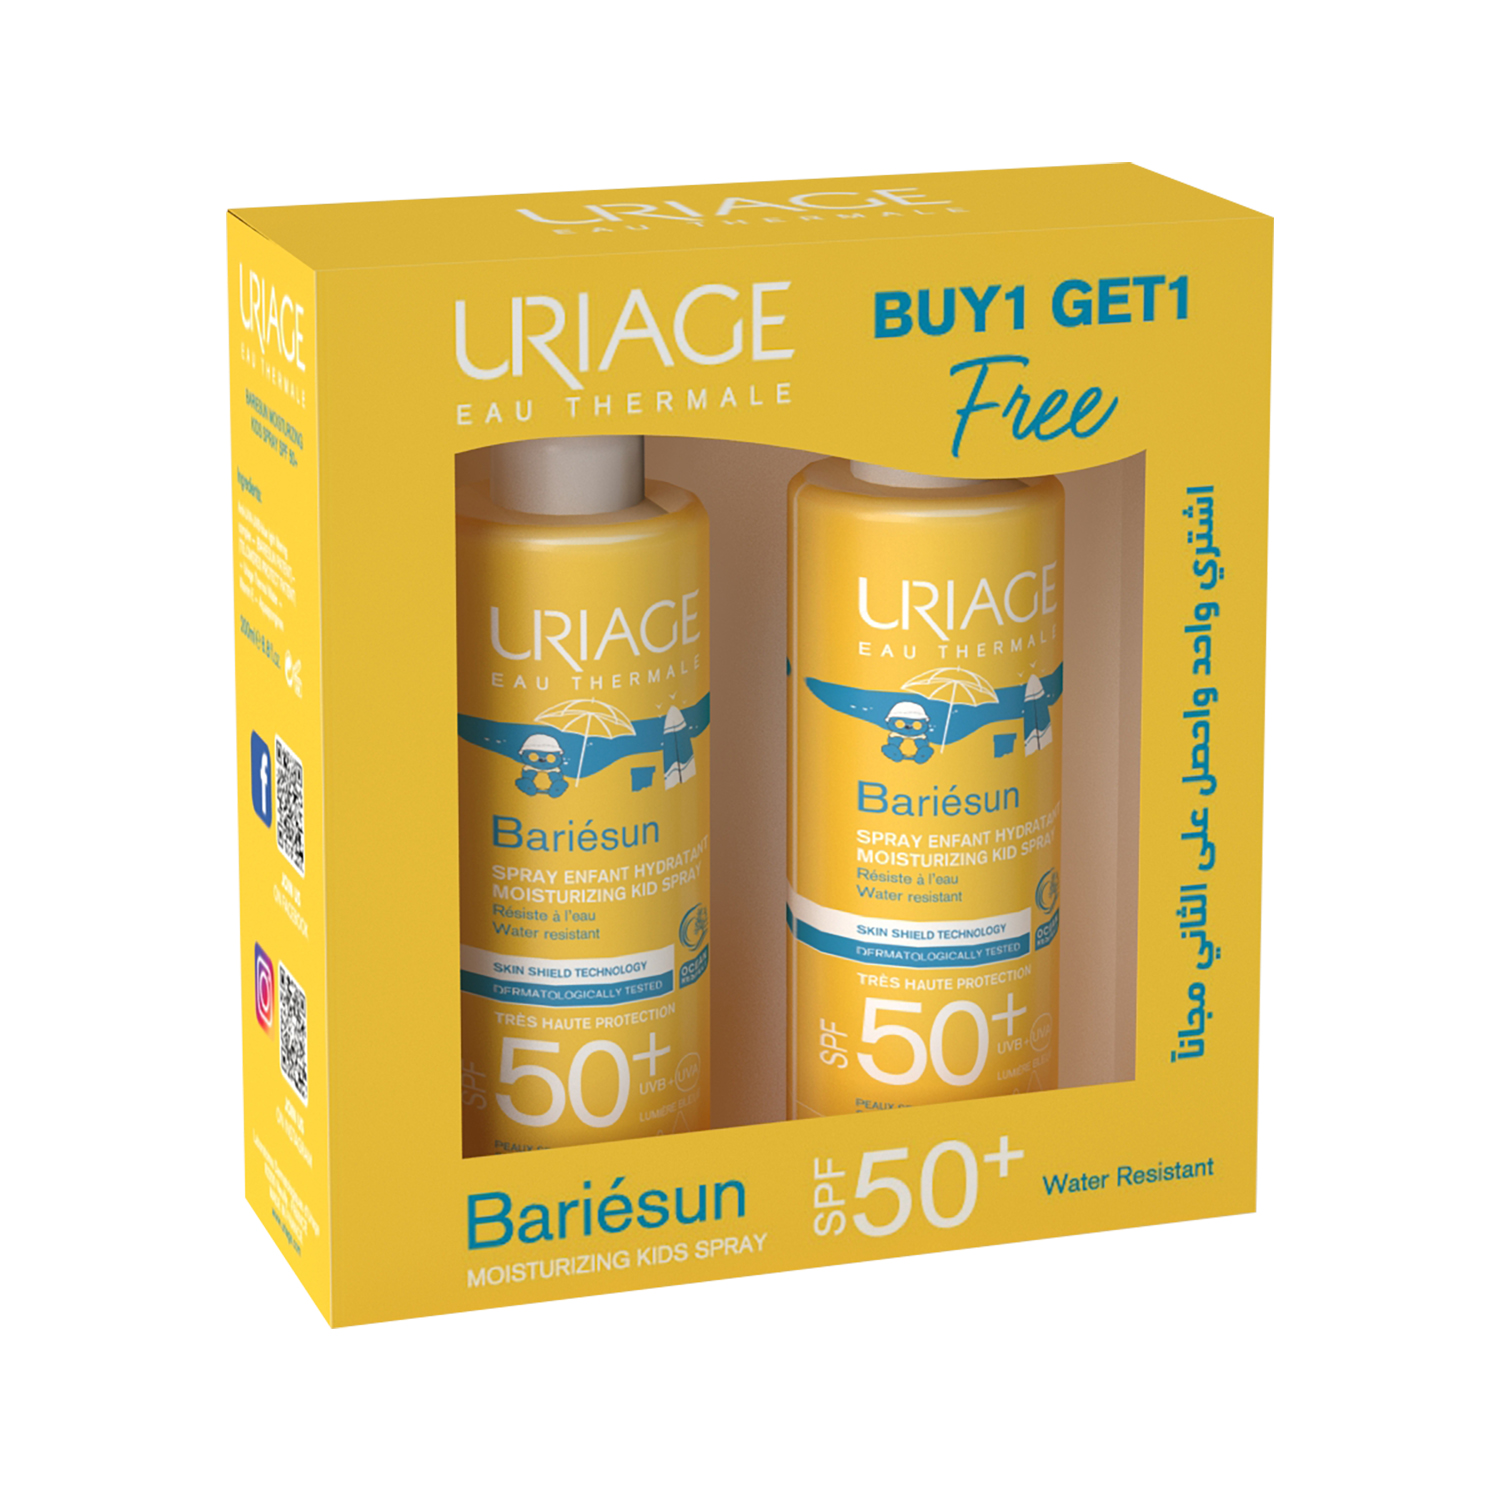 Product Image for Uriage